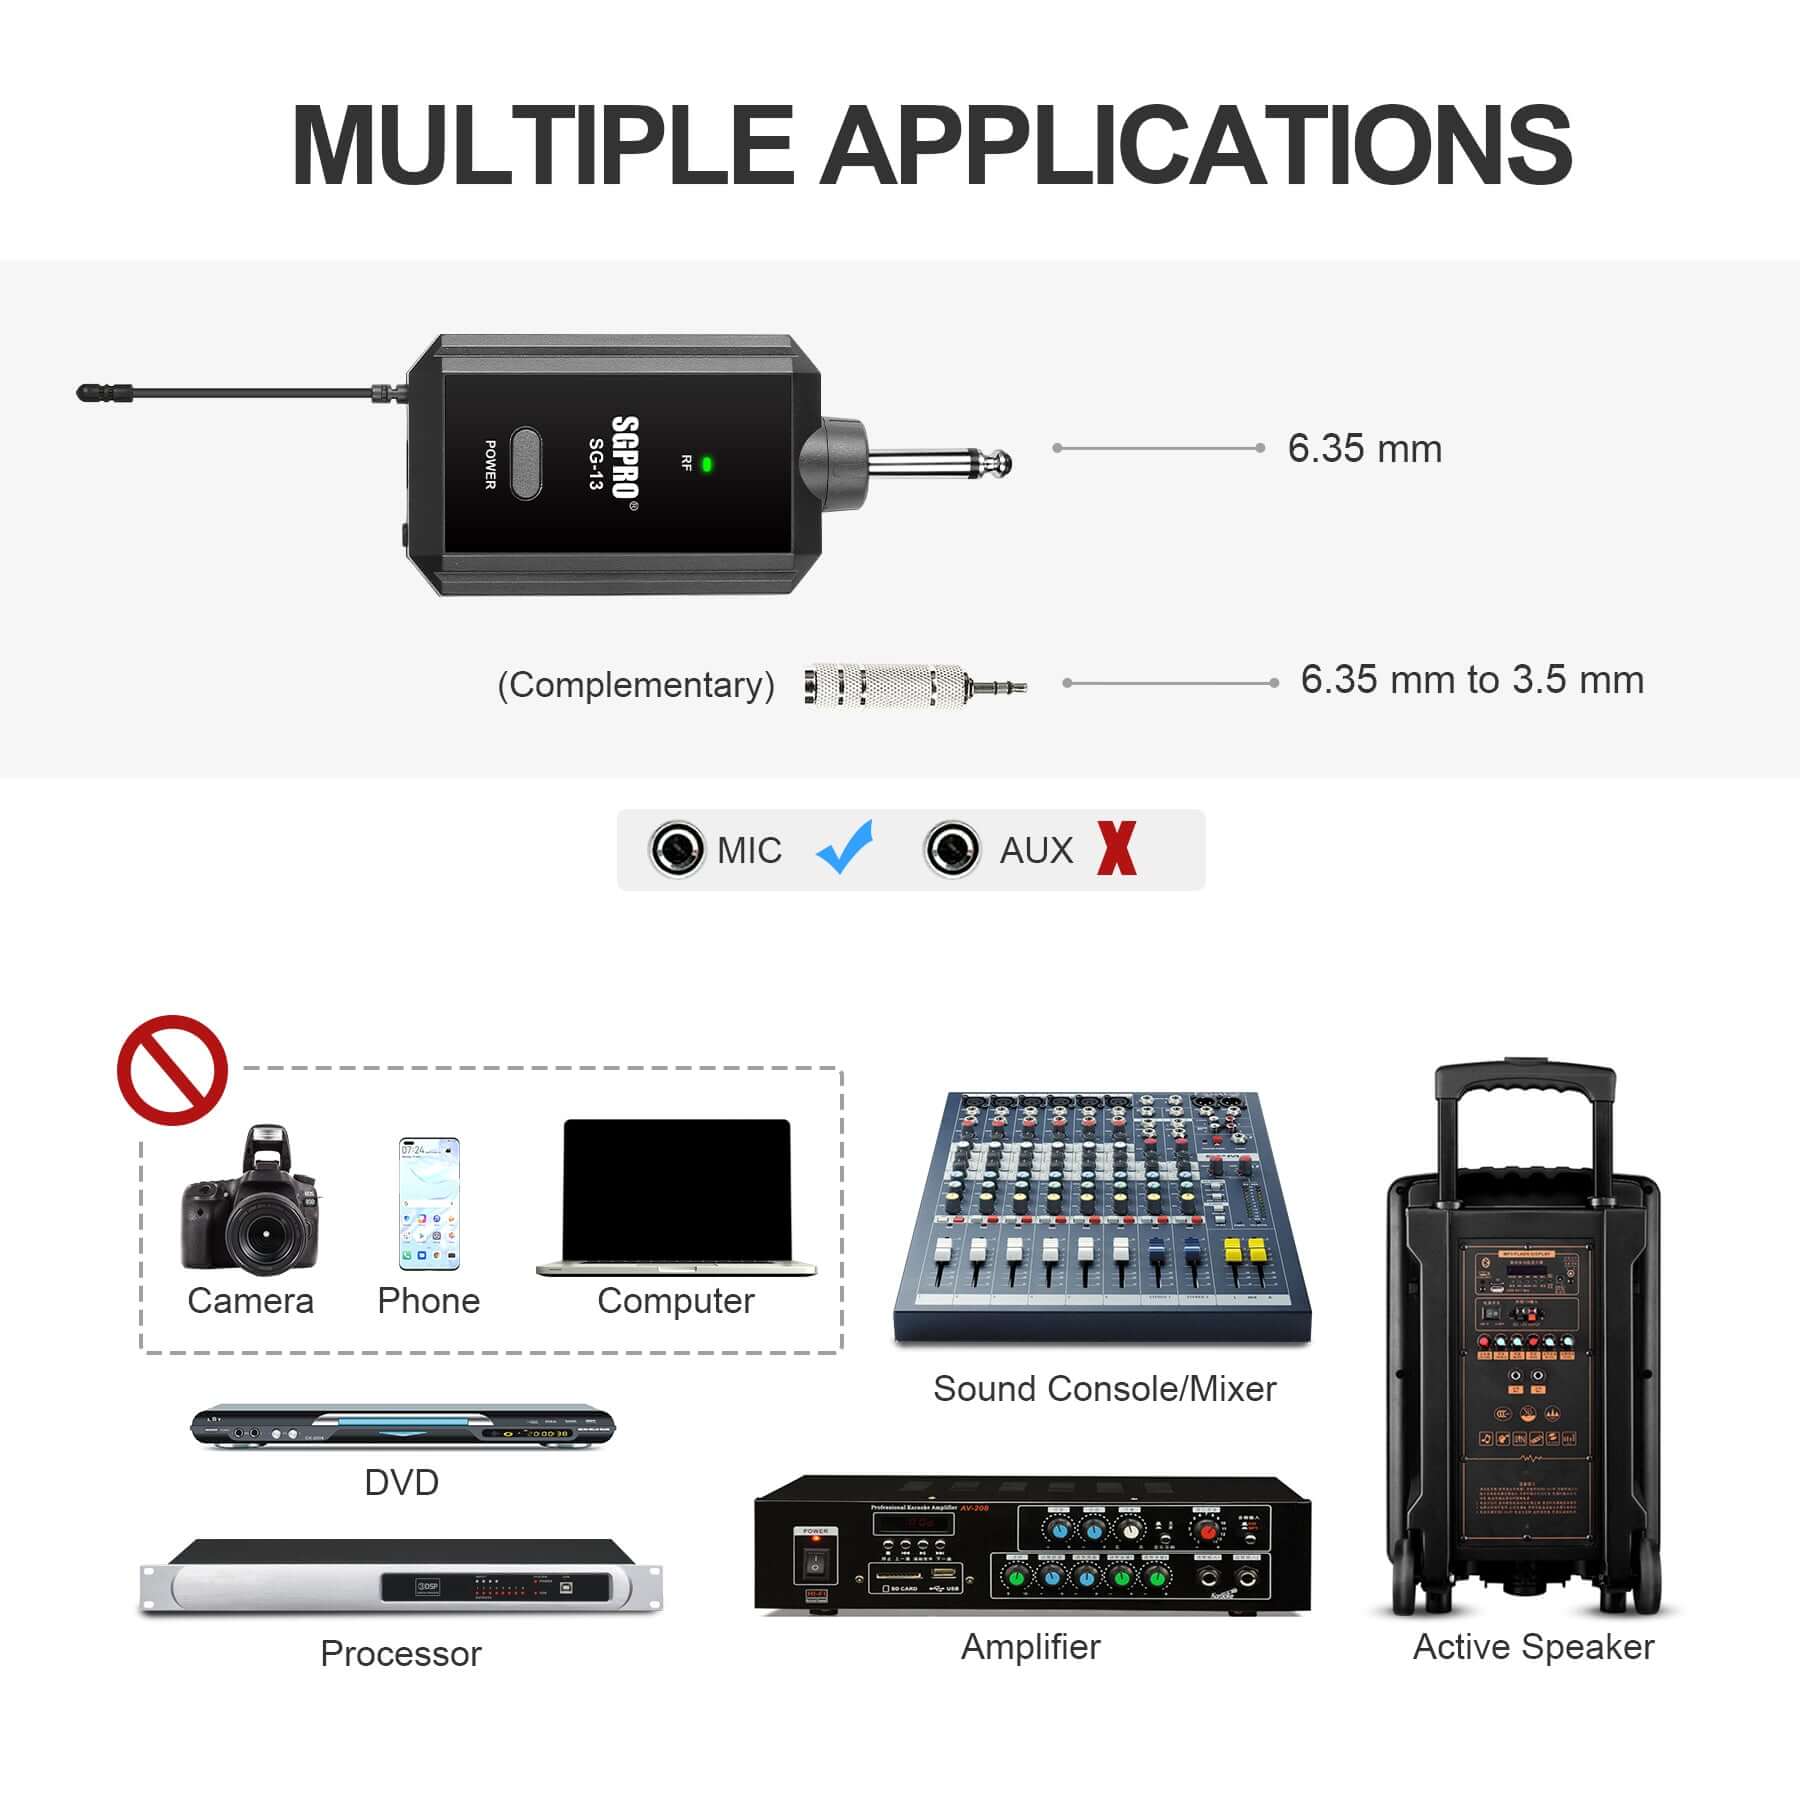 SGPRO Wireless Microphone, Single Handheld Mic with Compact Rechargeable Receiver SG-13, Microphone and Wireless Receiver - SGPRO AUDIO